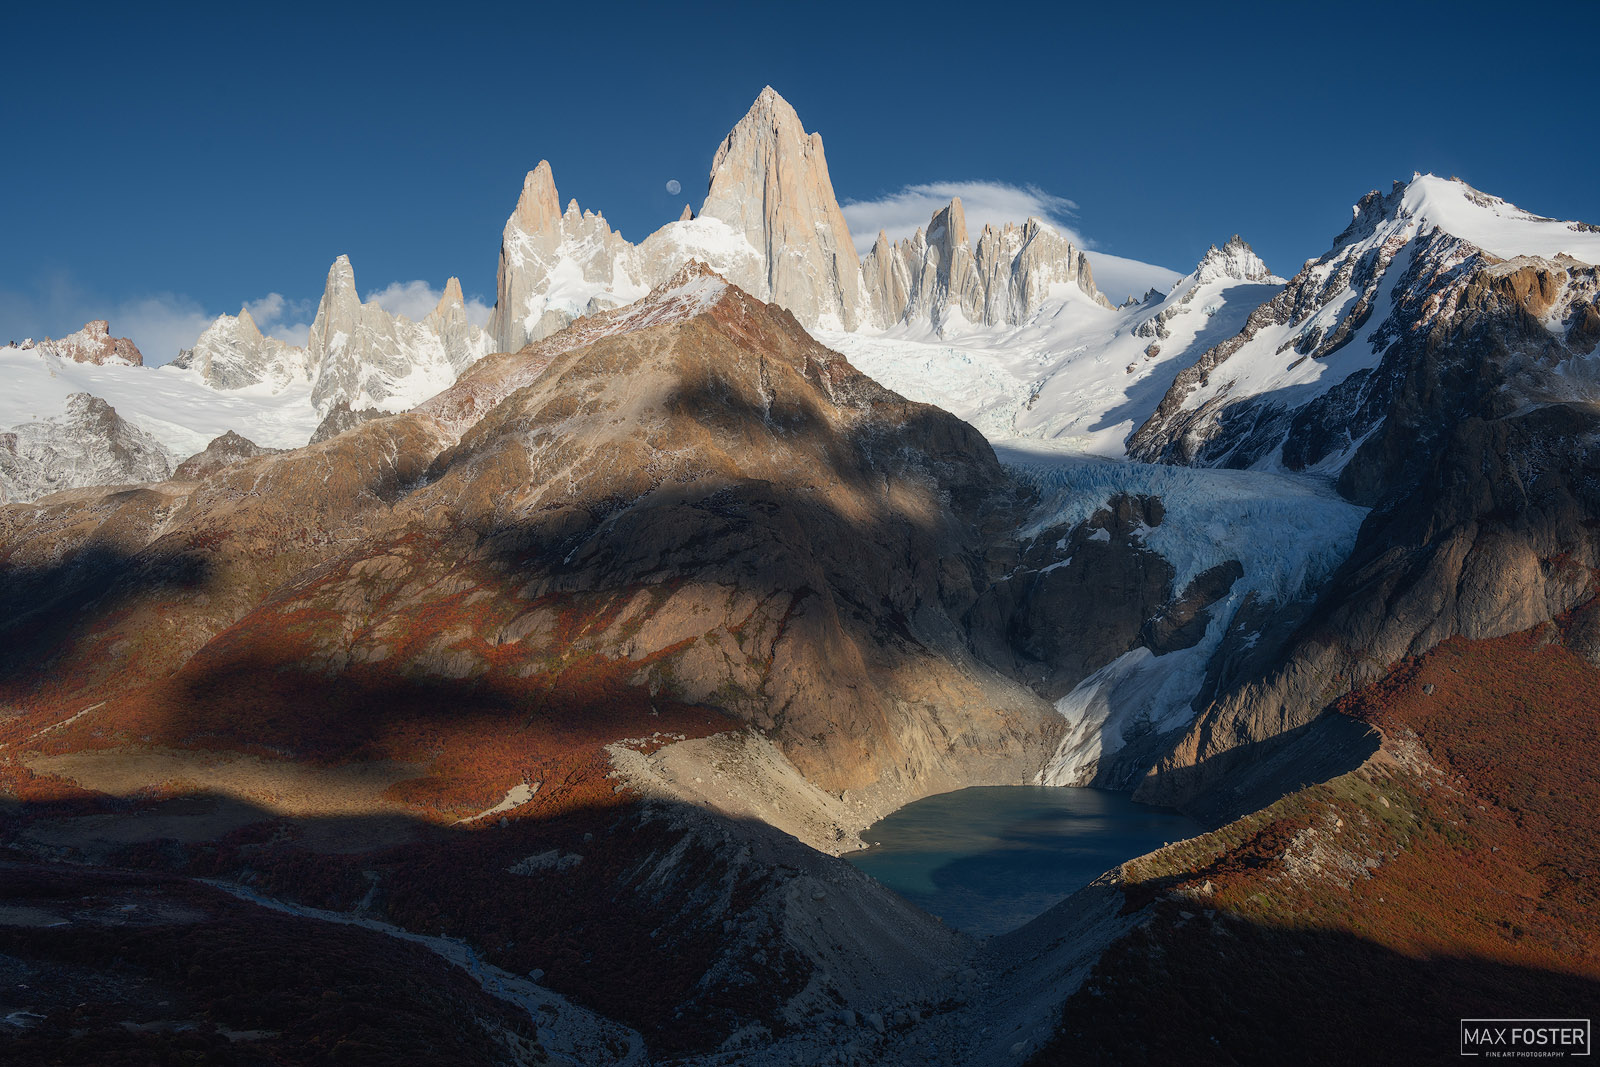 Immerse yourself in beauty with Serenade Of Shadows, Max Foster's limited edition photographic print of Mount Fitz Roy in Los...